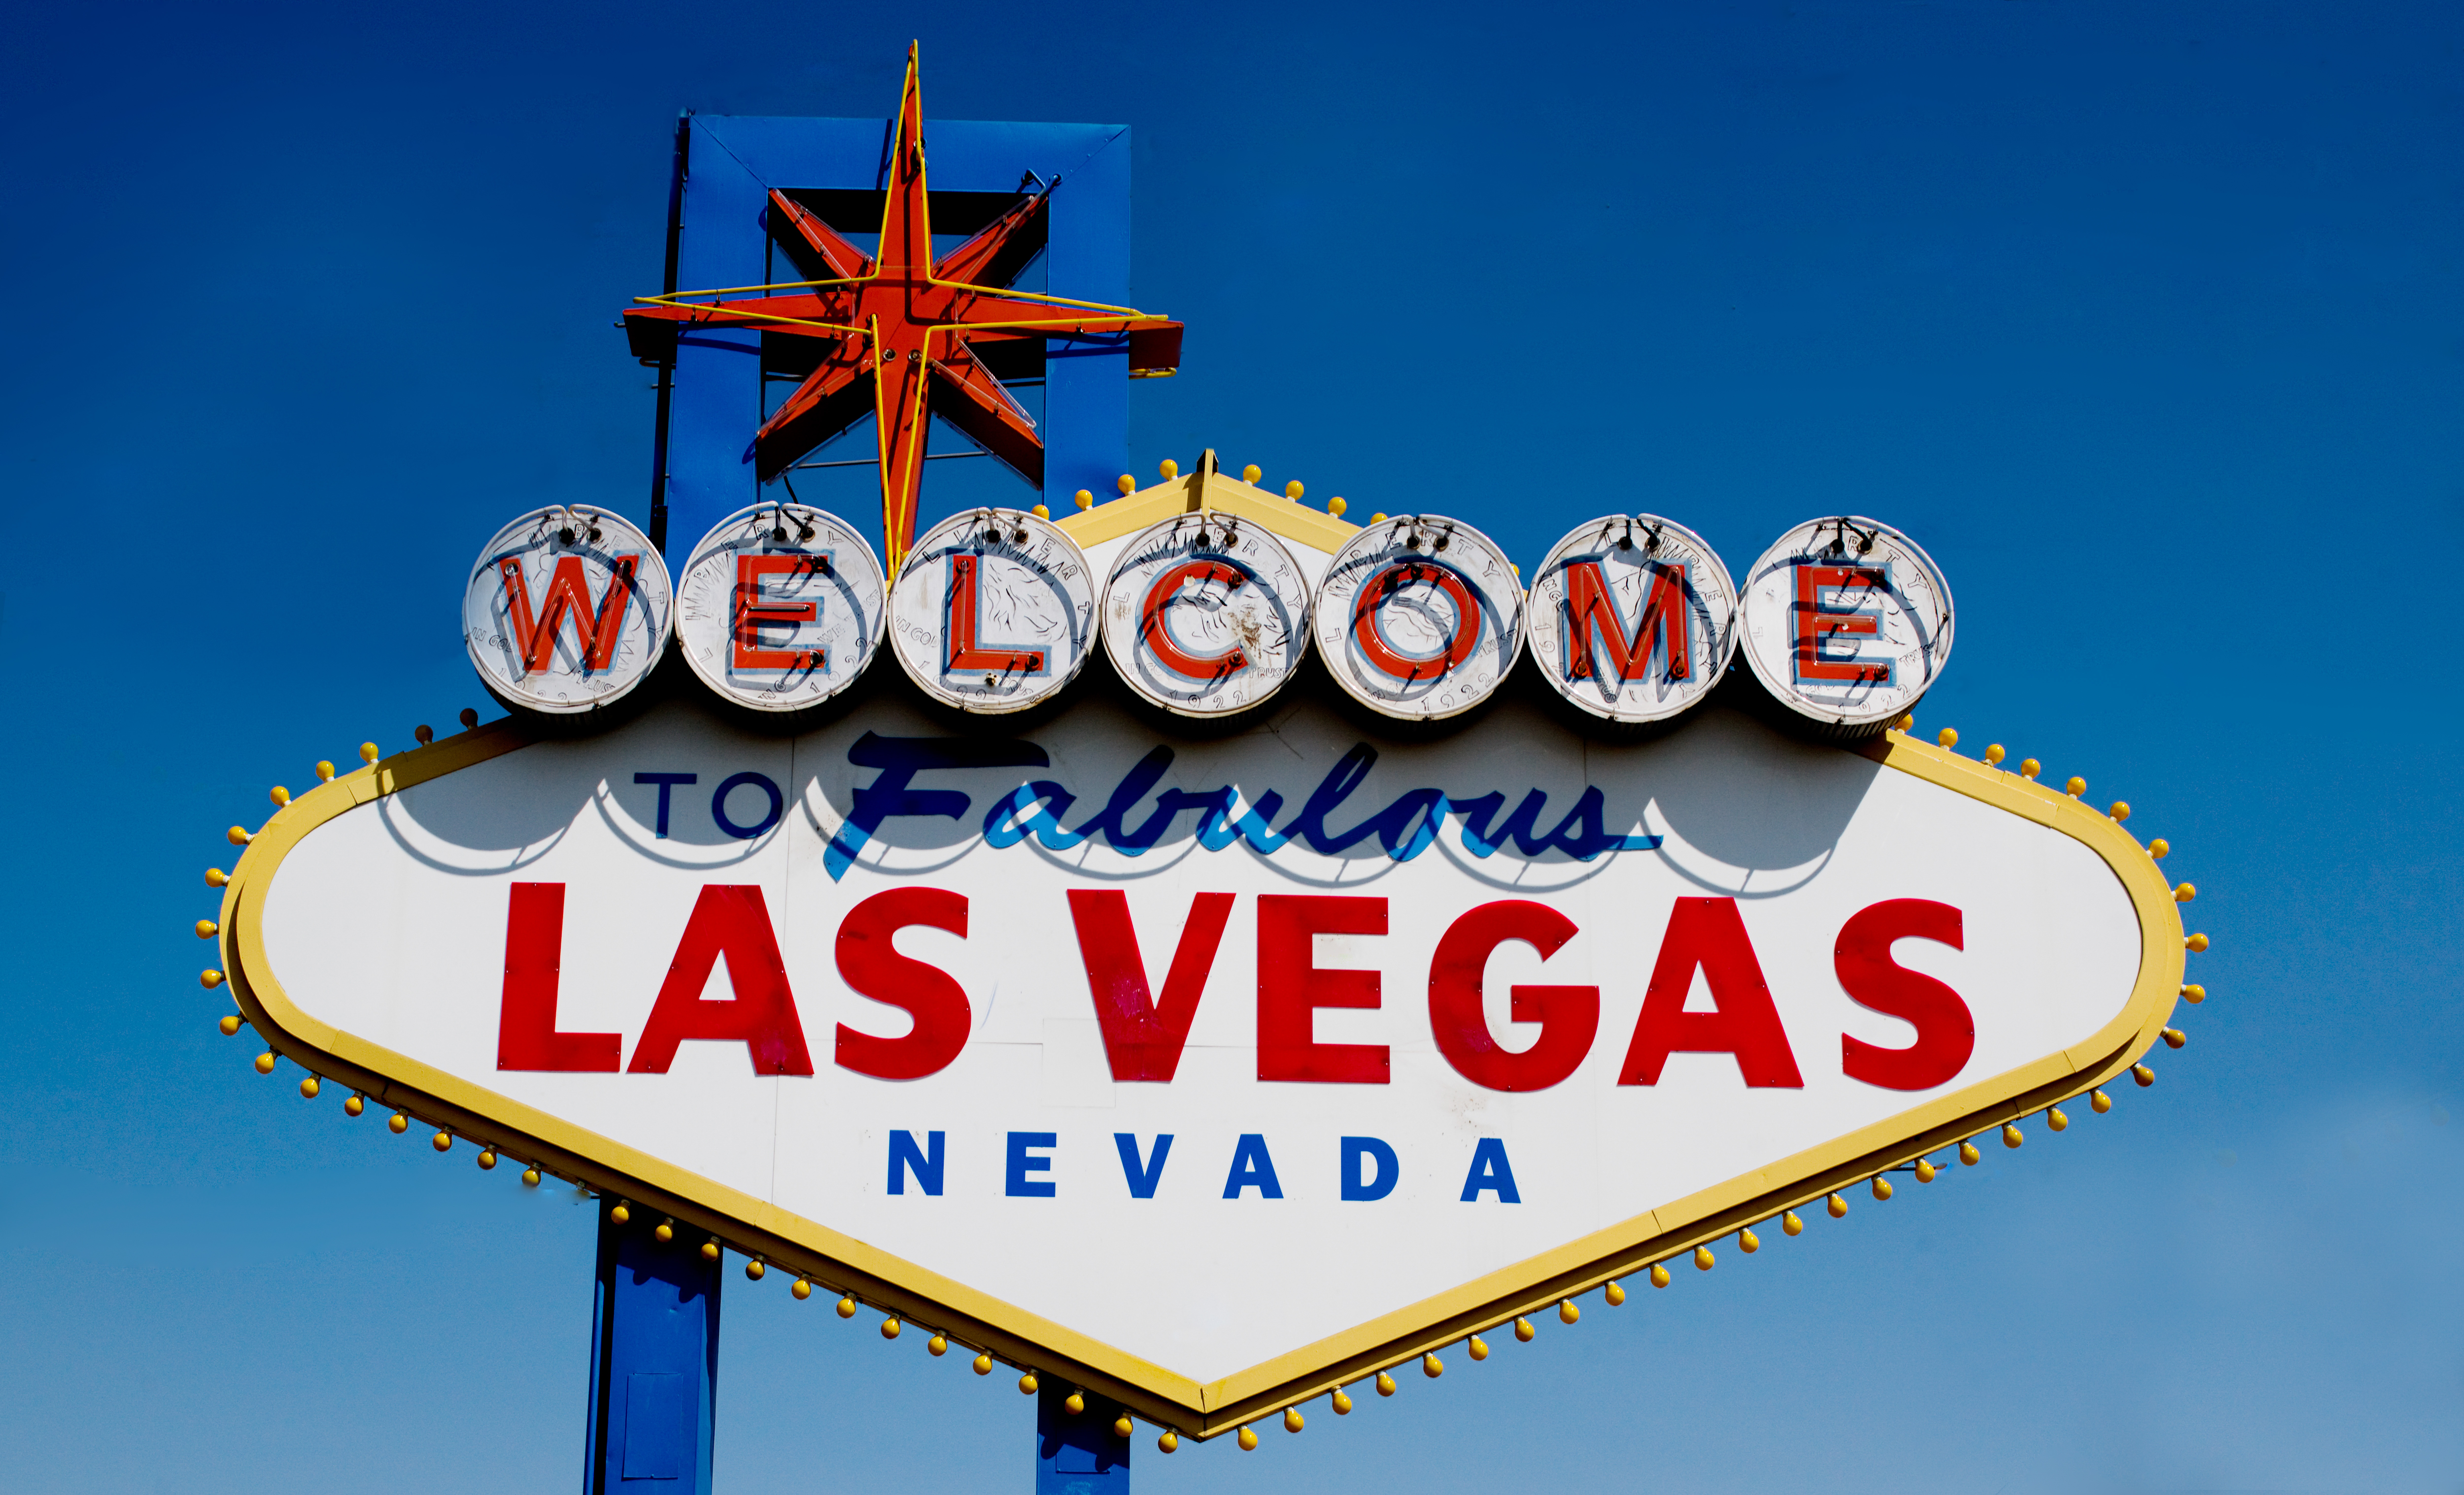 Image of the iconic Welcome to Las Vegas sign